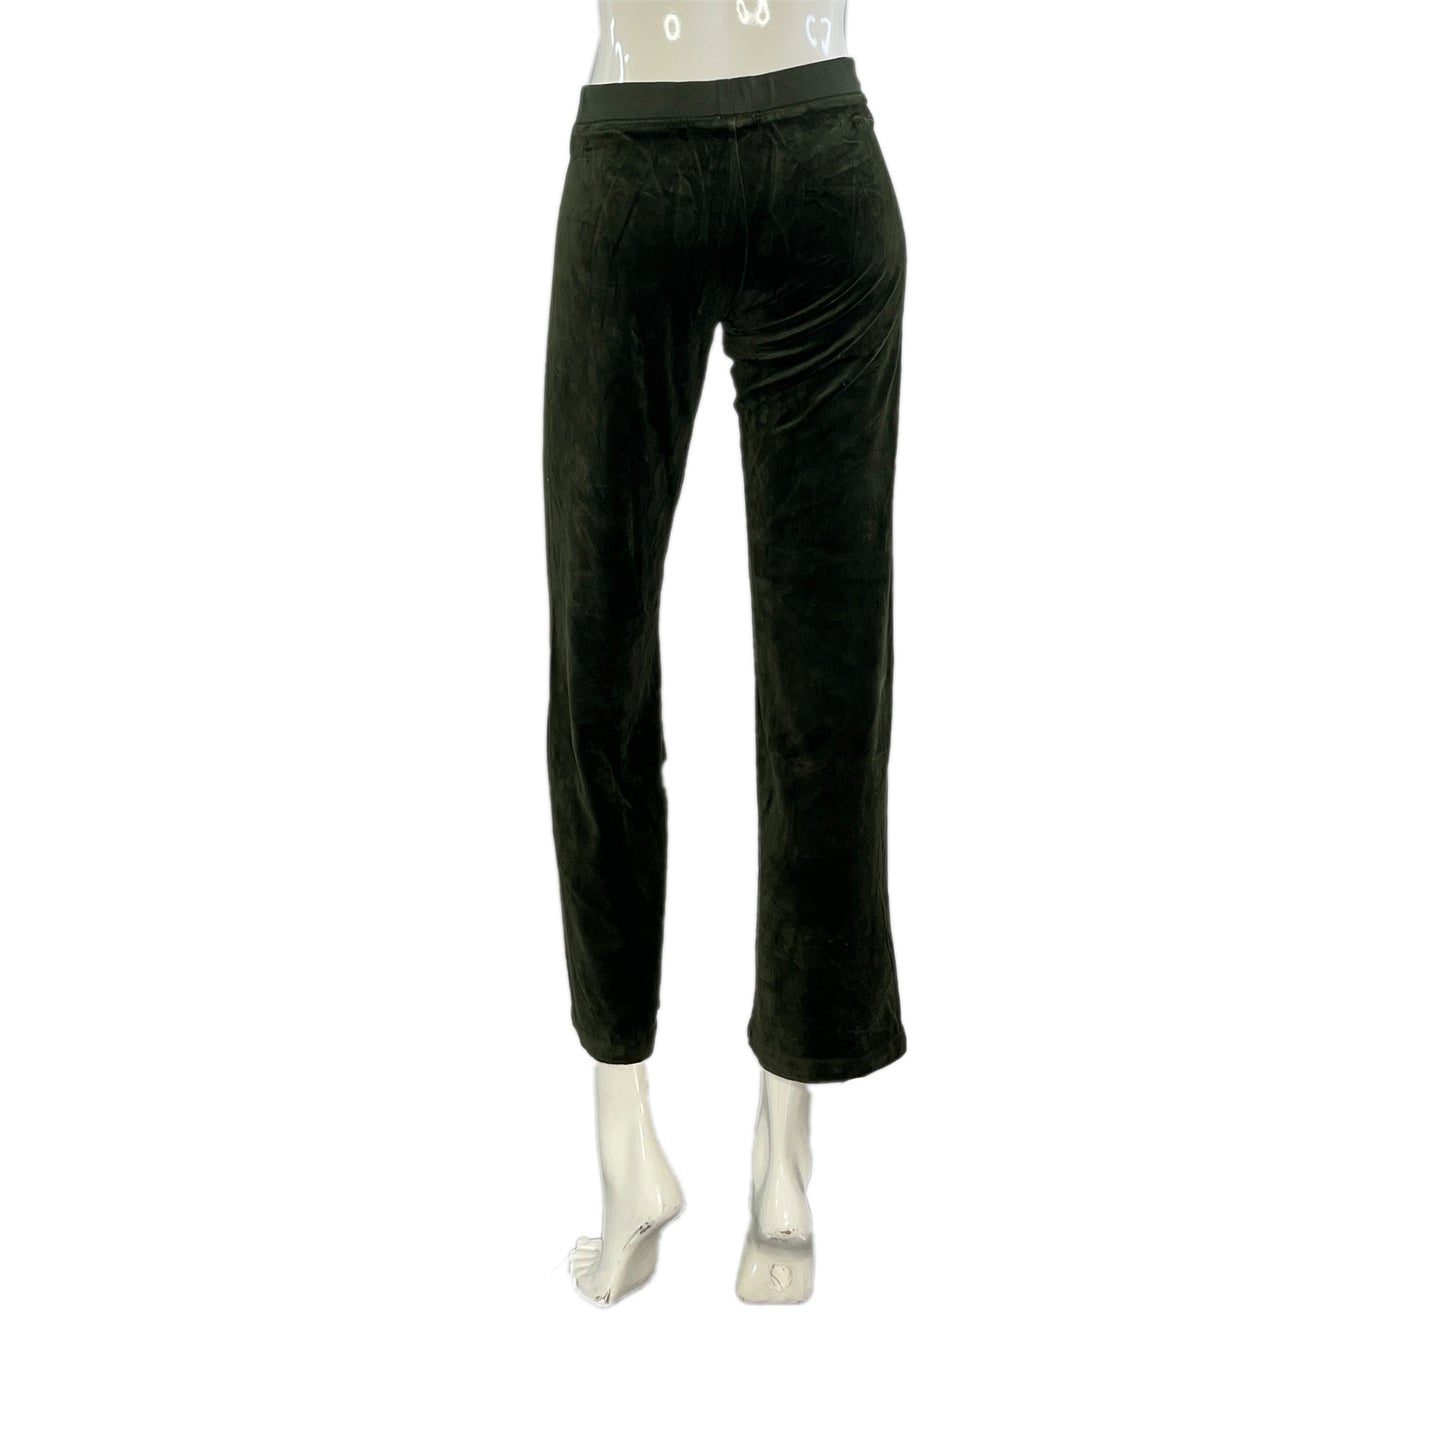 Juicy Couture Velour Tracksuit Pants Olive Size S SKU 000003-1